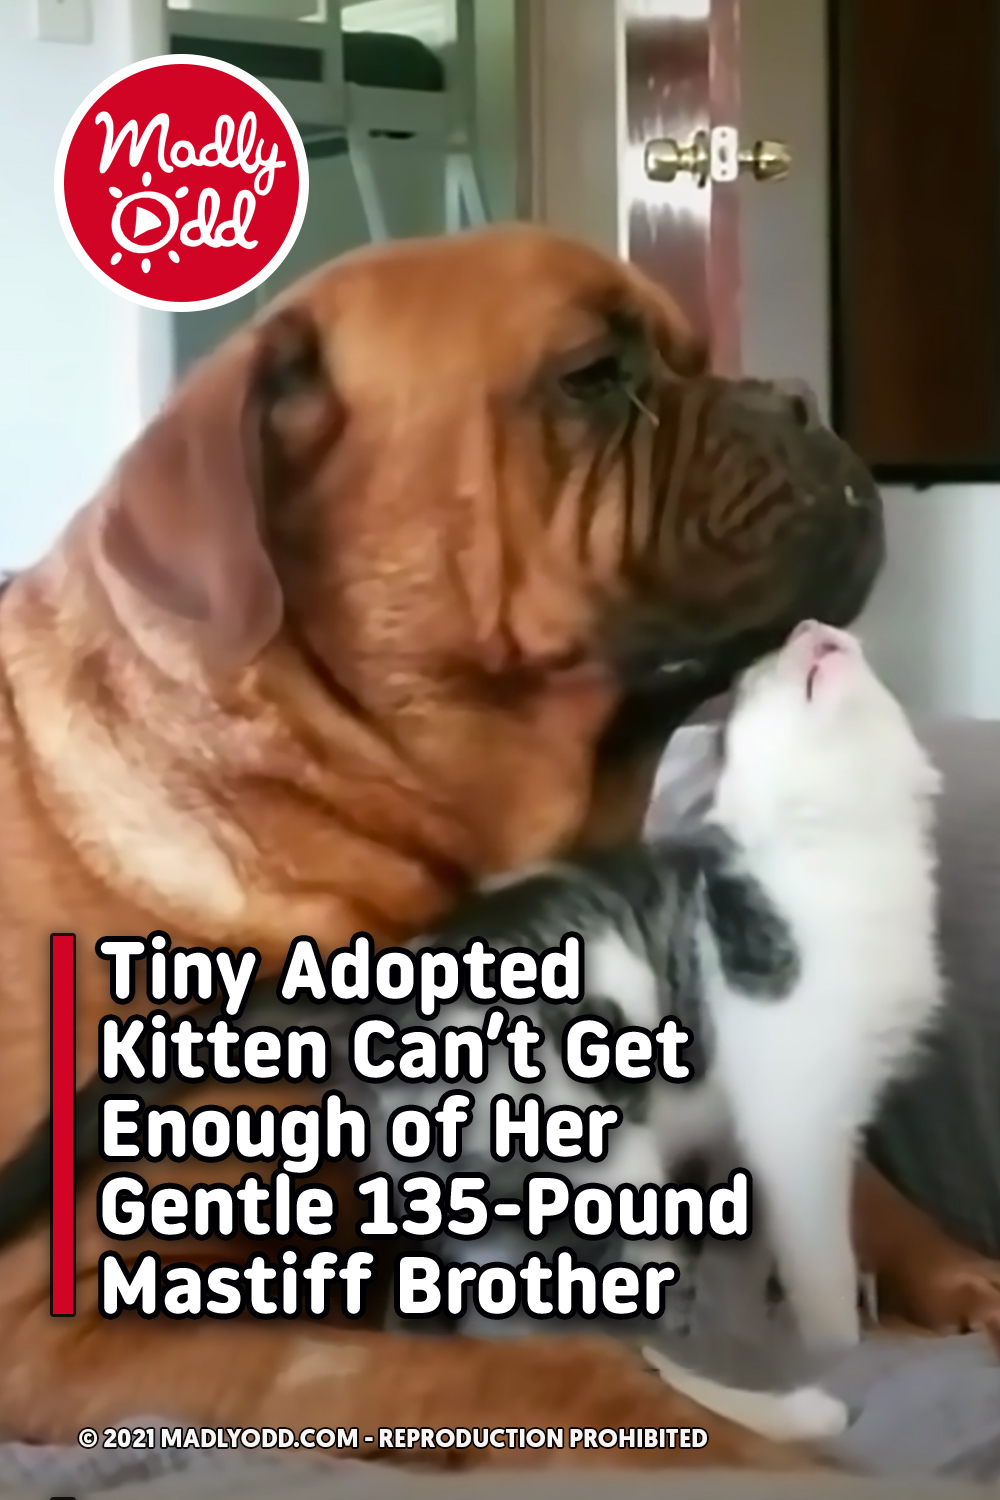 Tiny Adopted Kitten Can’t Get Enough of Her Gentle 135-Pound Mastiff Brother